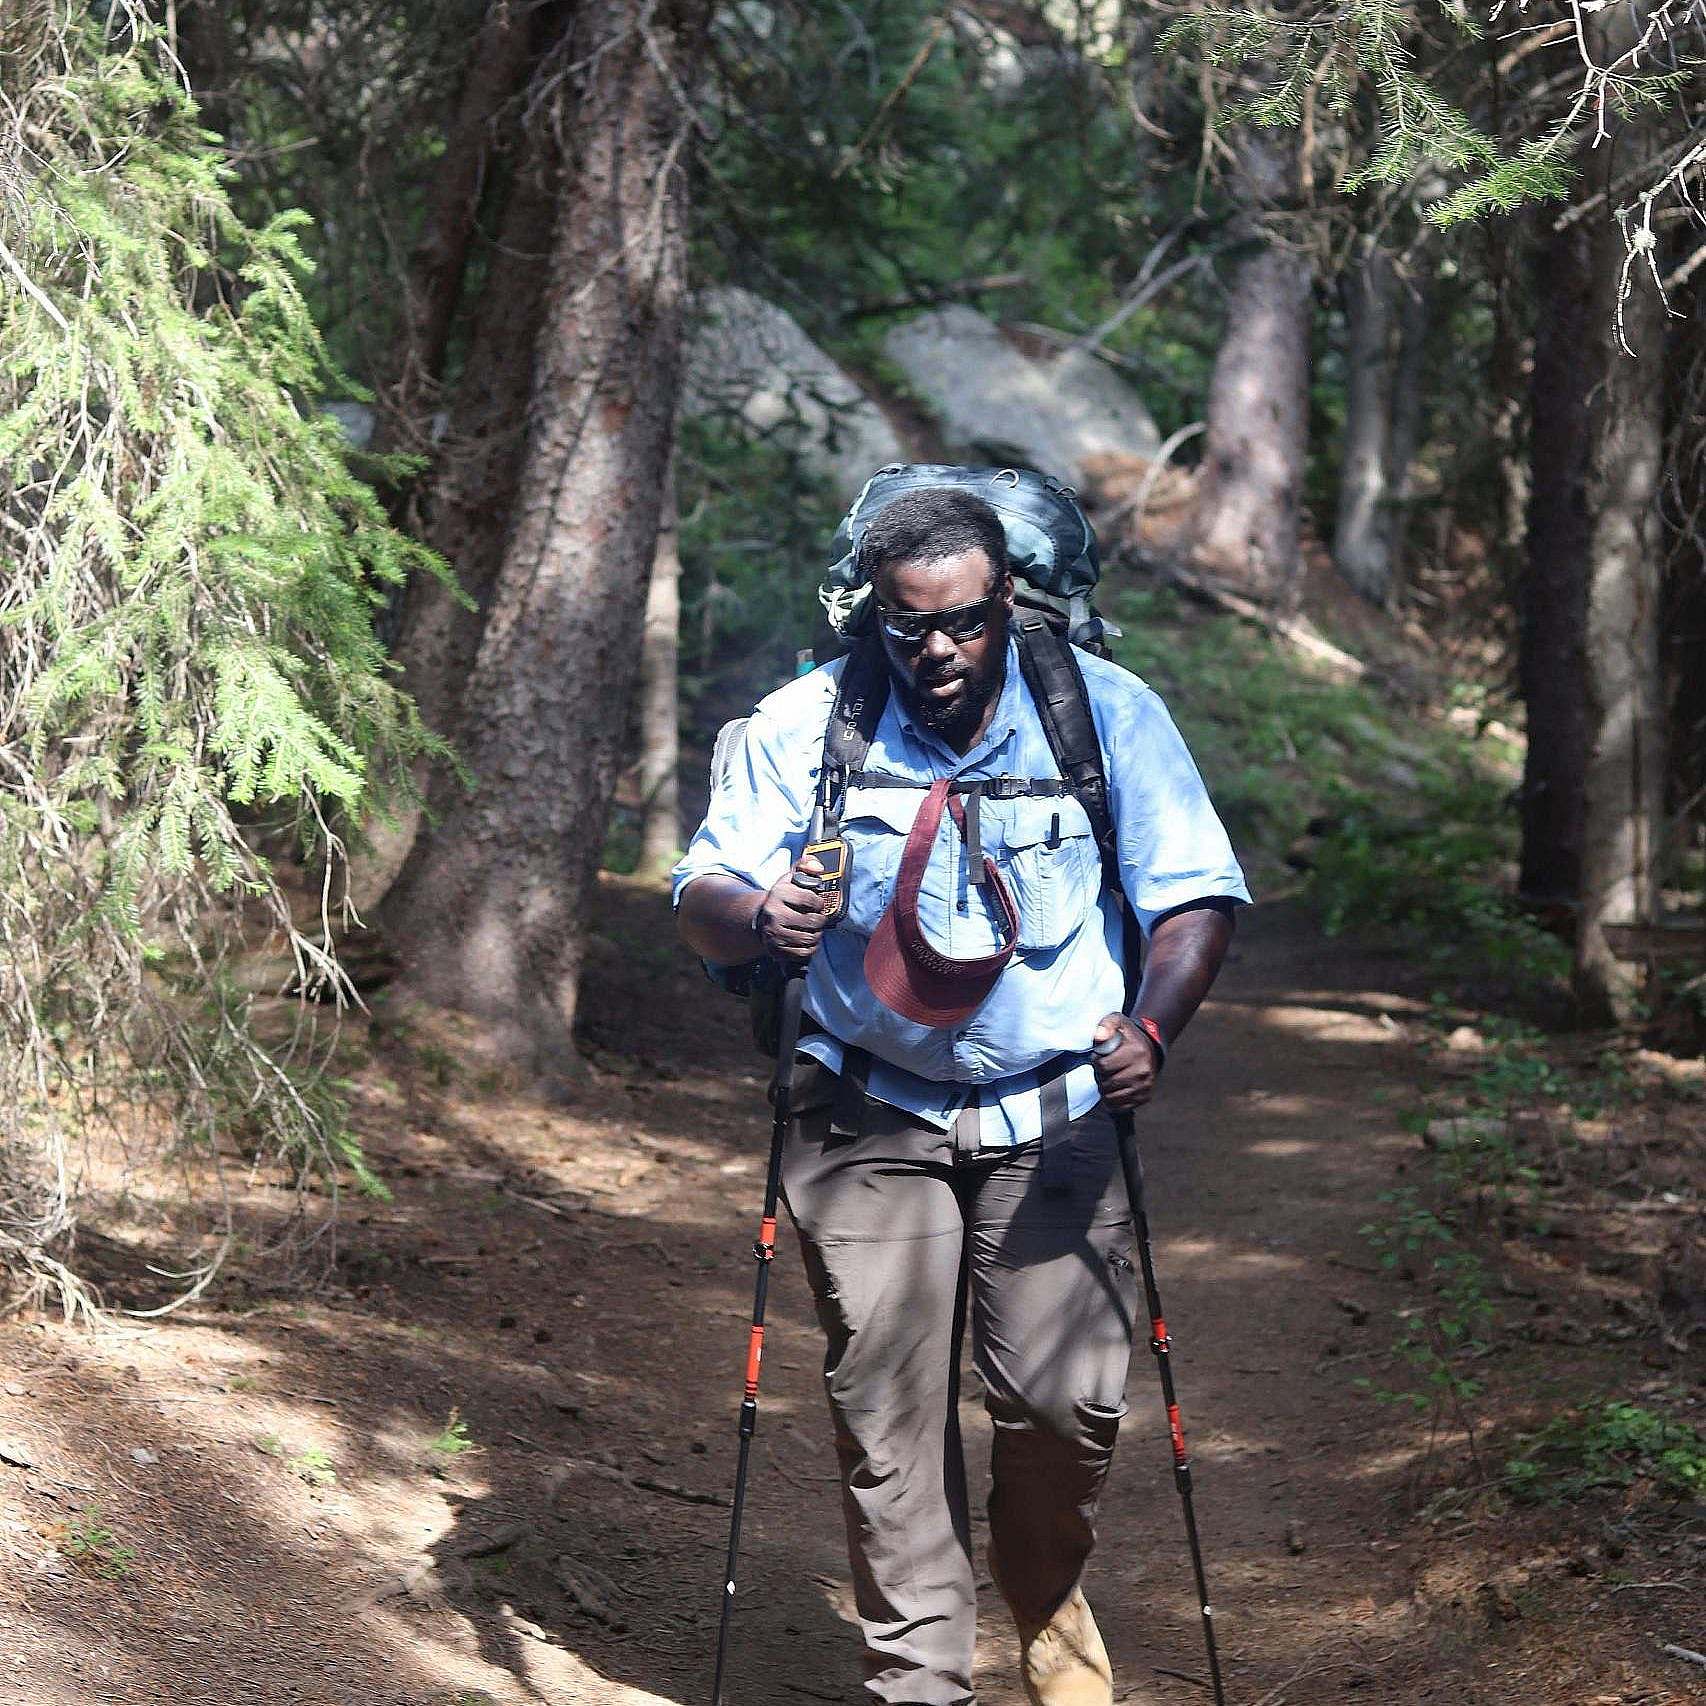 A backpacker hikes on a trail in a forest.